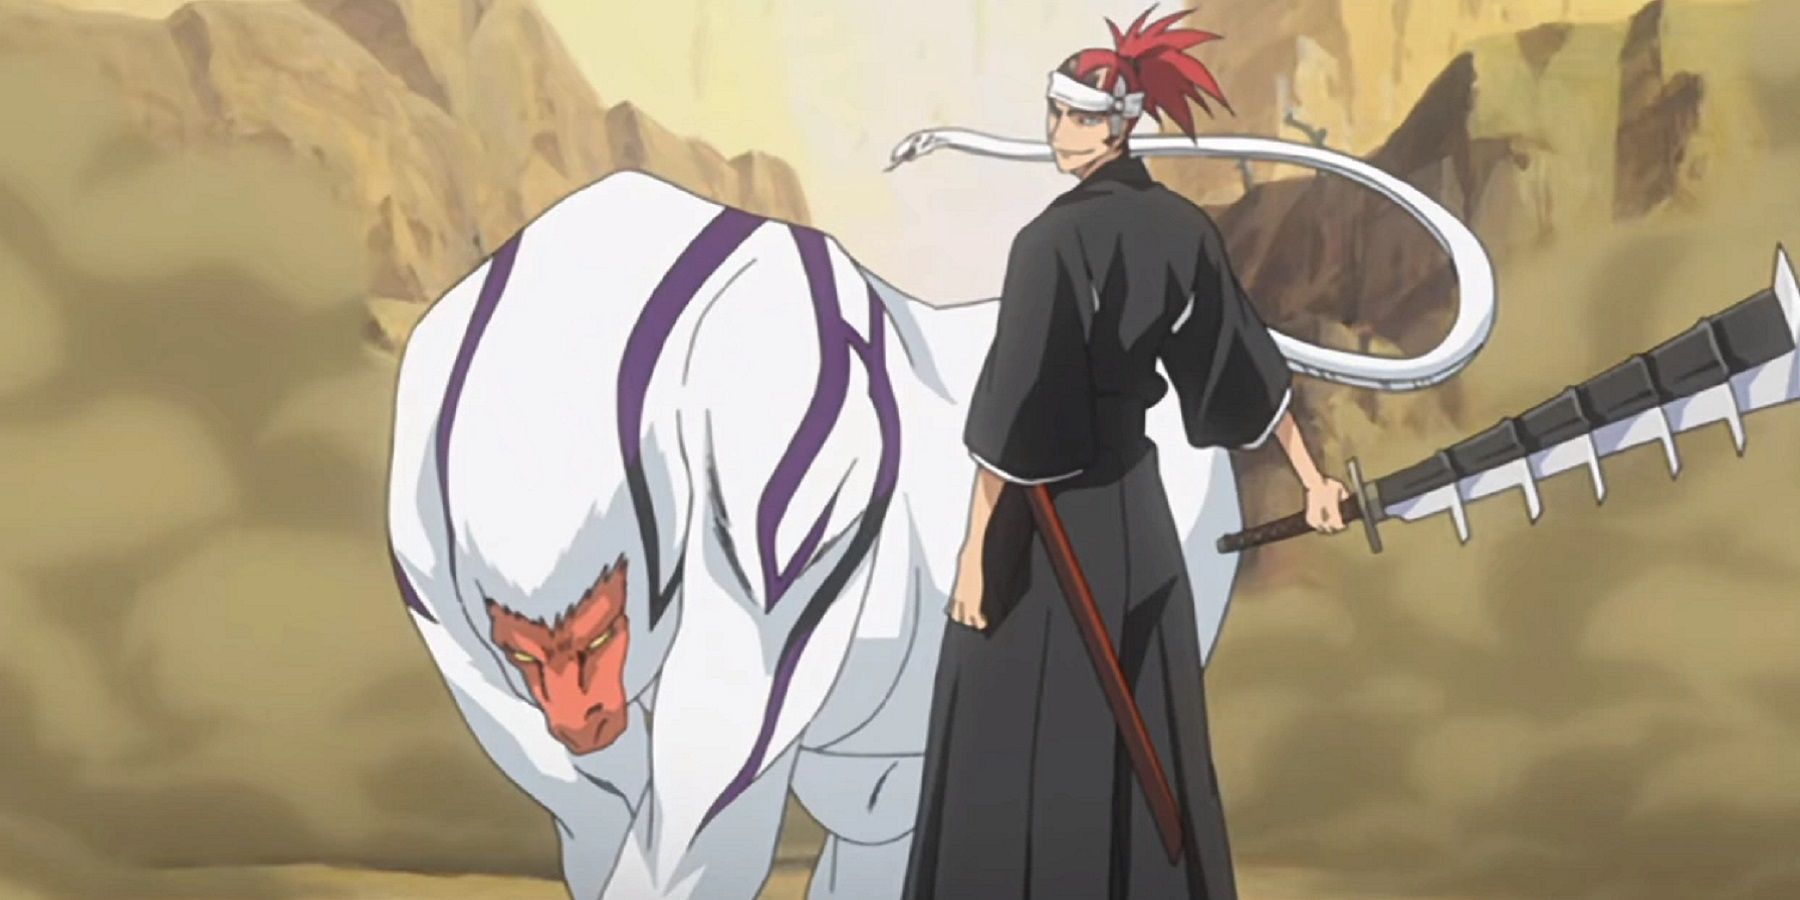 Bleach TYBW episode 18 preview hints at Rukia and Renji's return